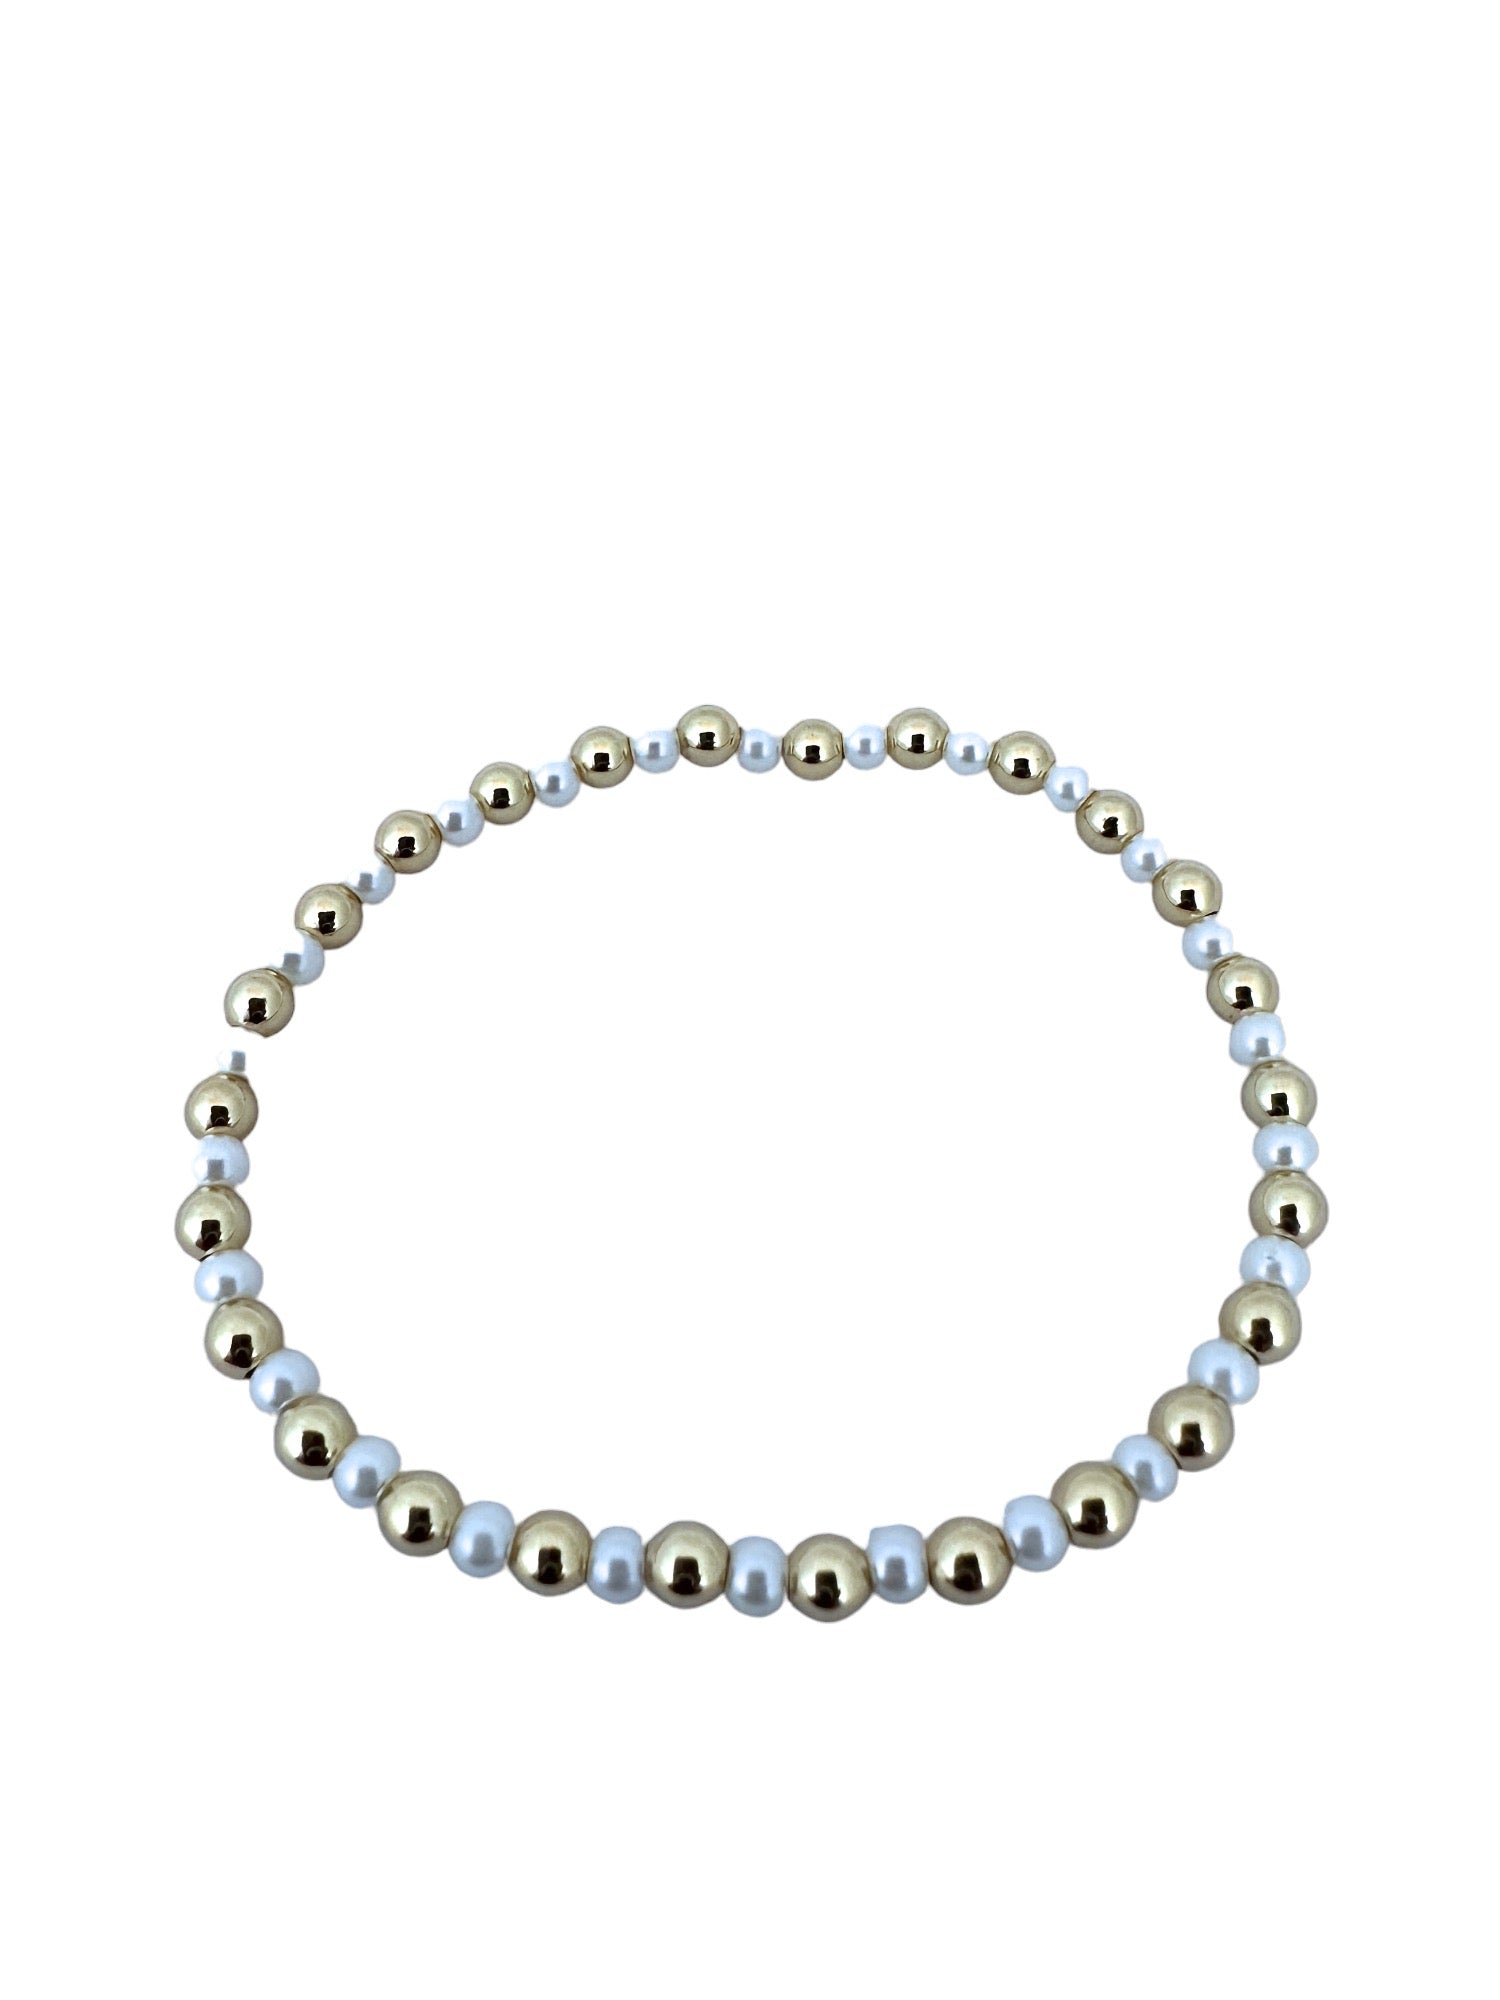 4mm Gold or Silver Balls with Alternating Pearls Stretch Bracelet